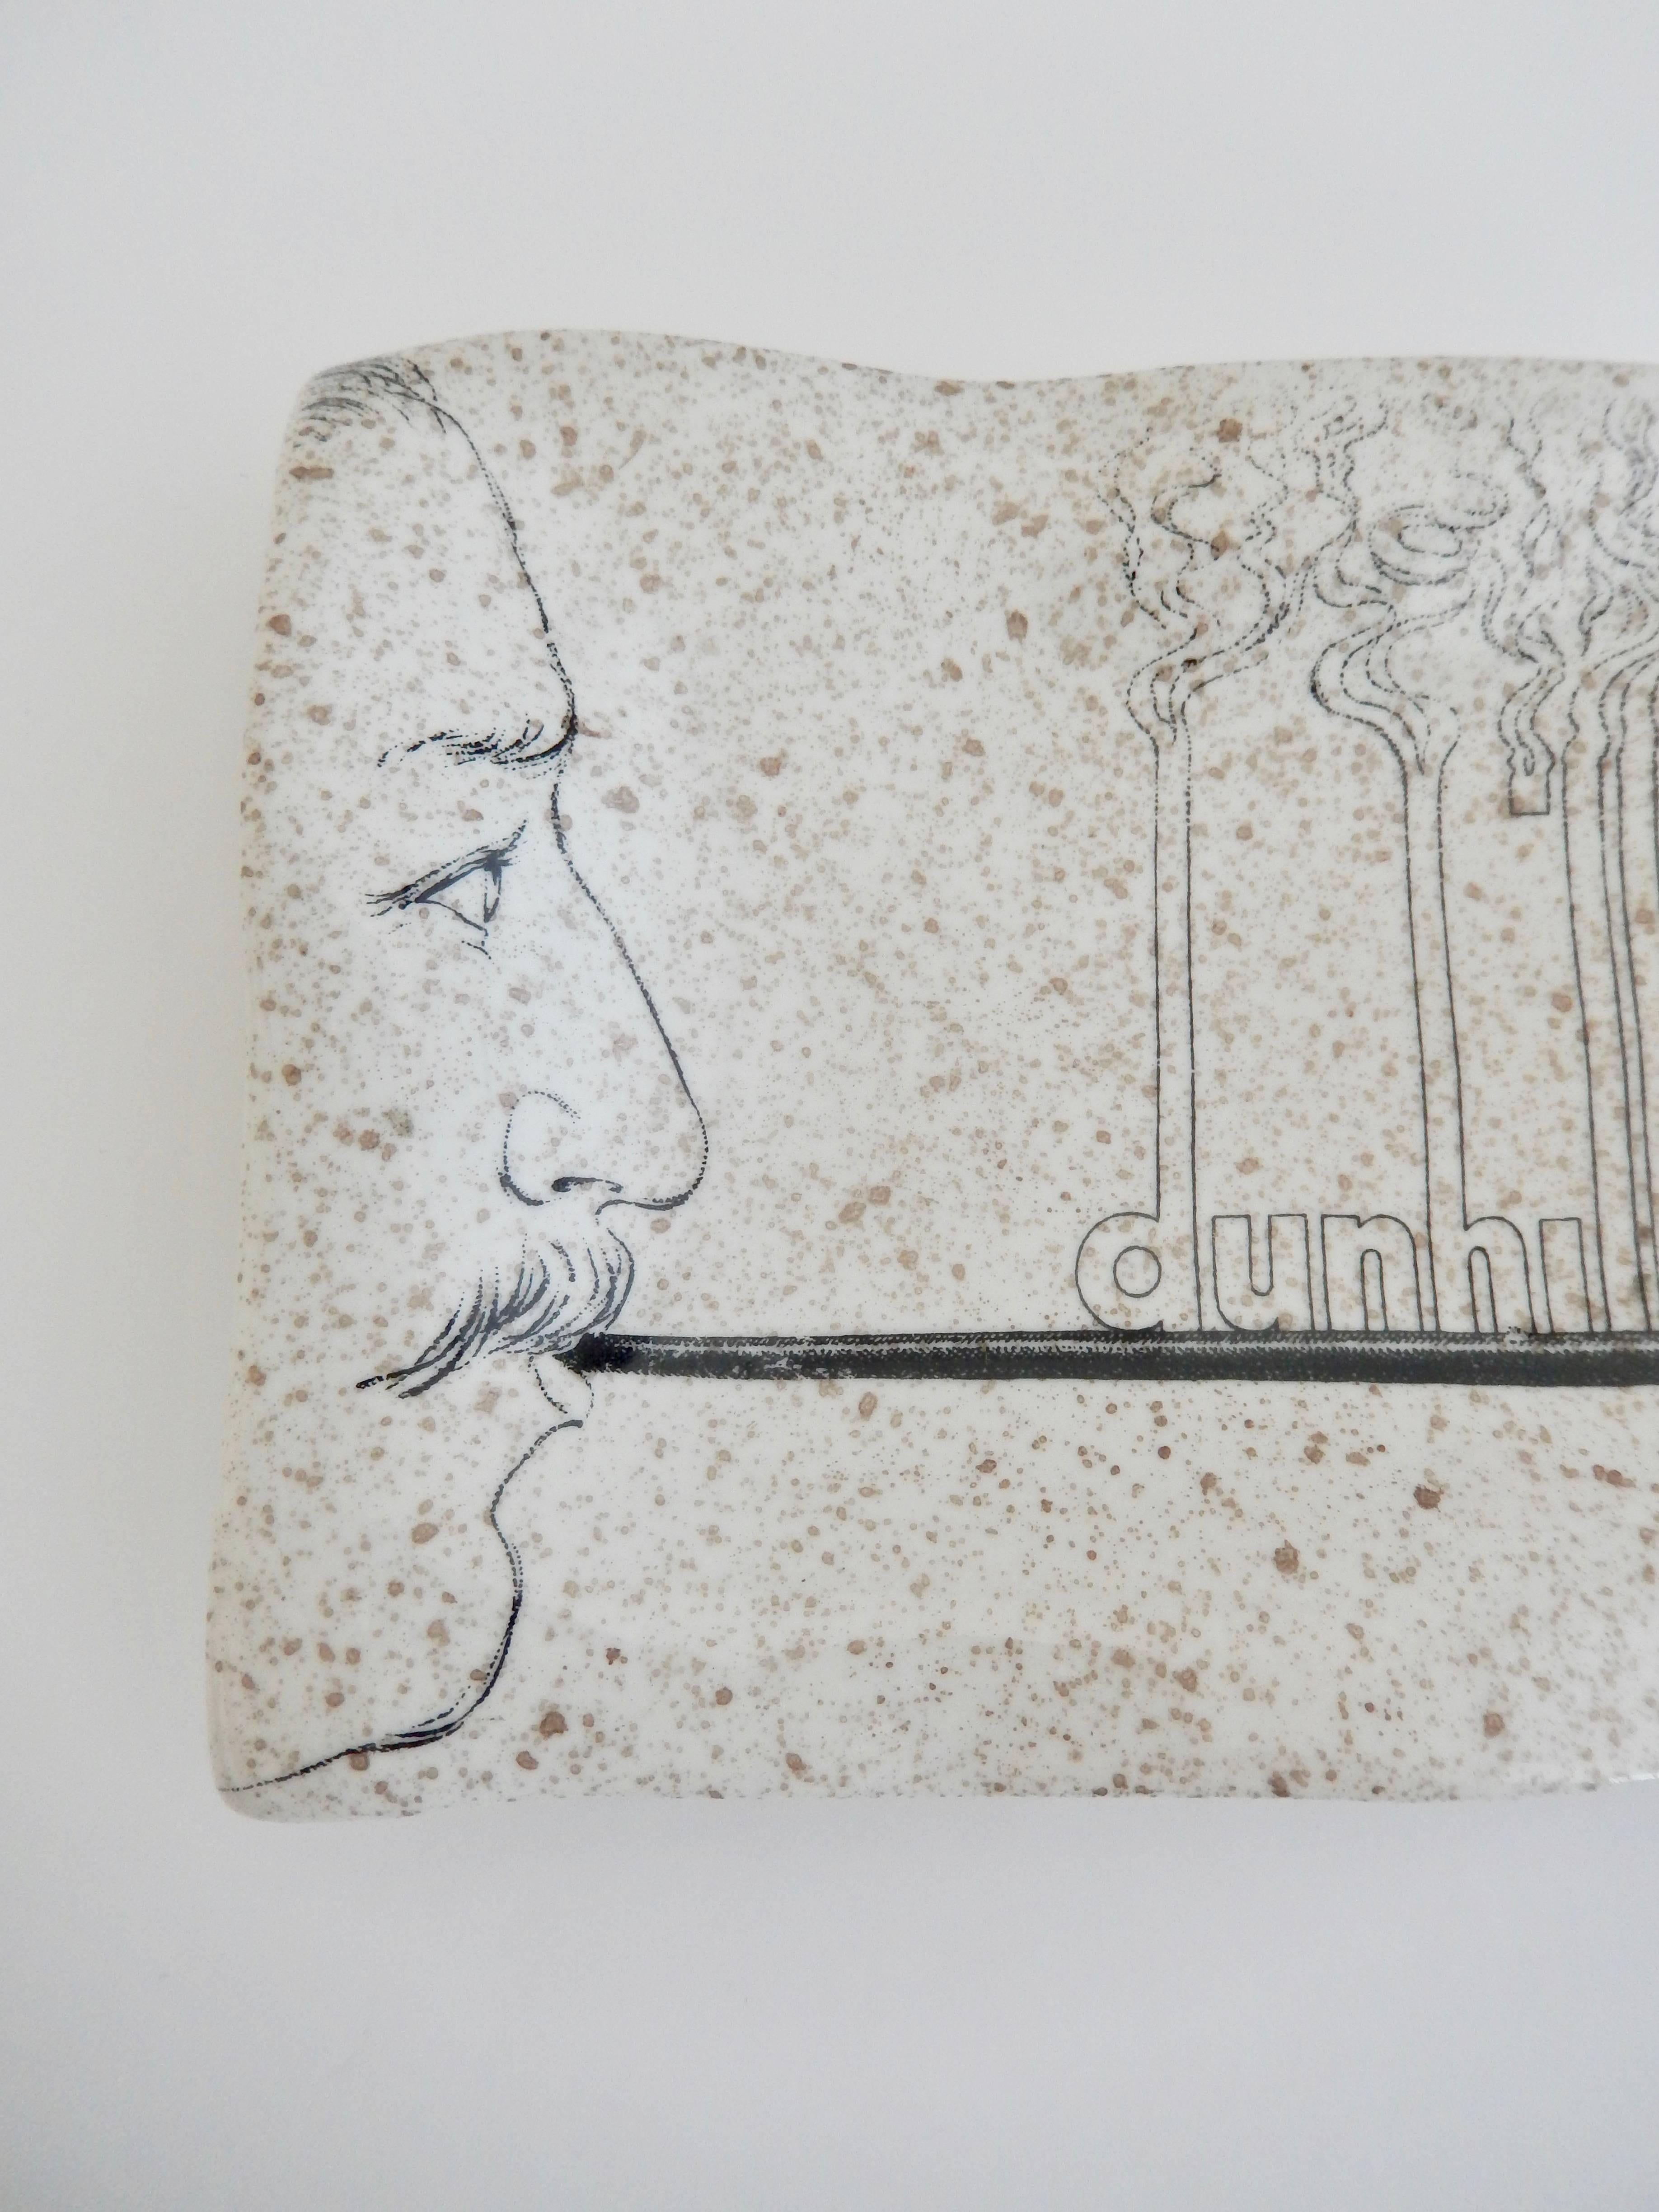 A ceramic tray from 1978 by Piero Fornasetti for Dunhill, New York, depicting a self-portrait of the artist holding a paintbrush. An original graphic design, probably used for promotional purposes. Marked “EXCLUSIVE FOR DUNHILL NEW YORK”. A similar